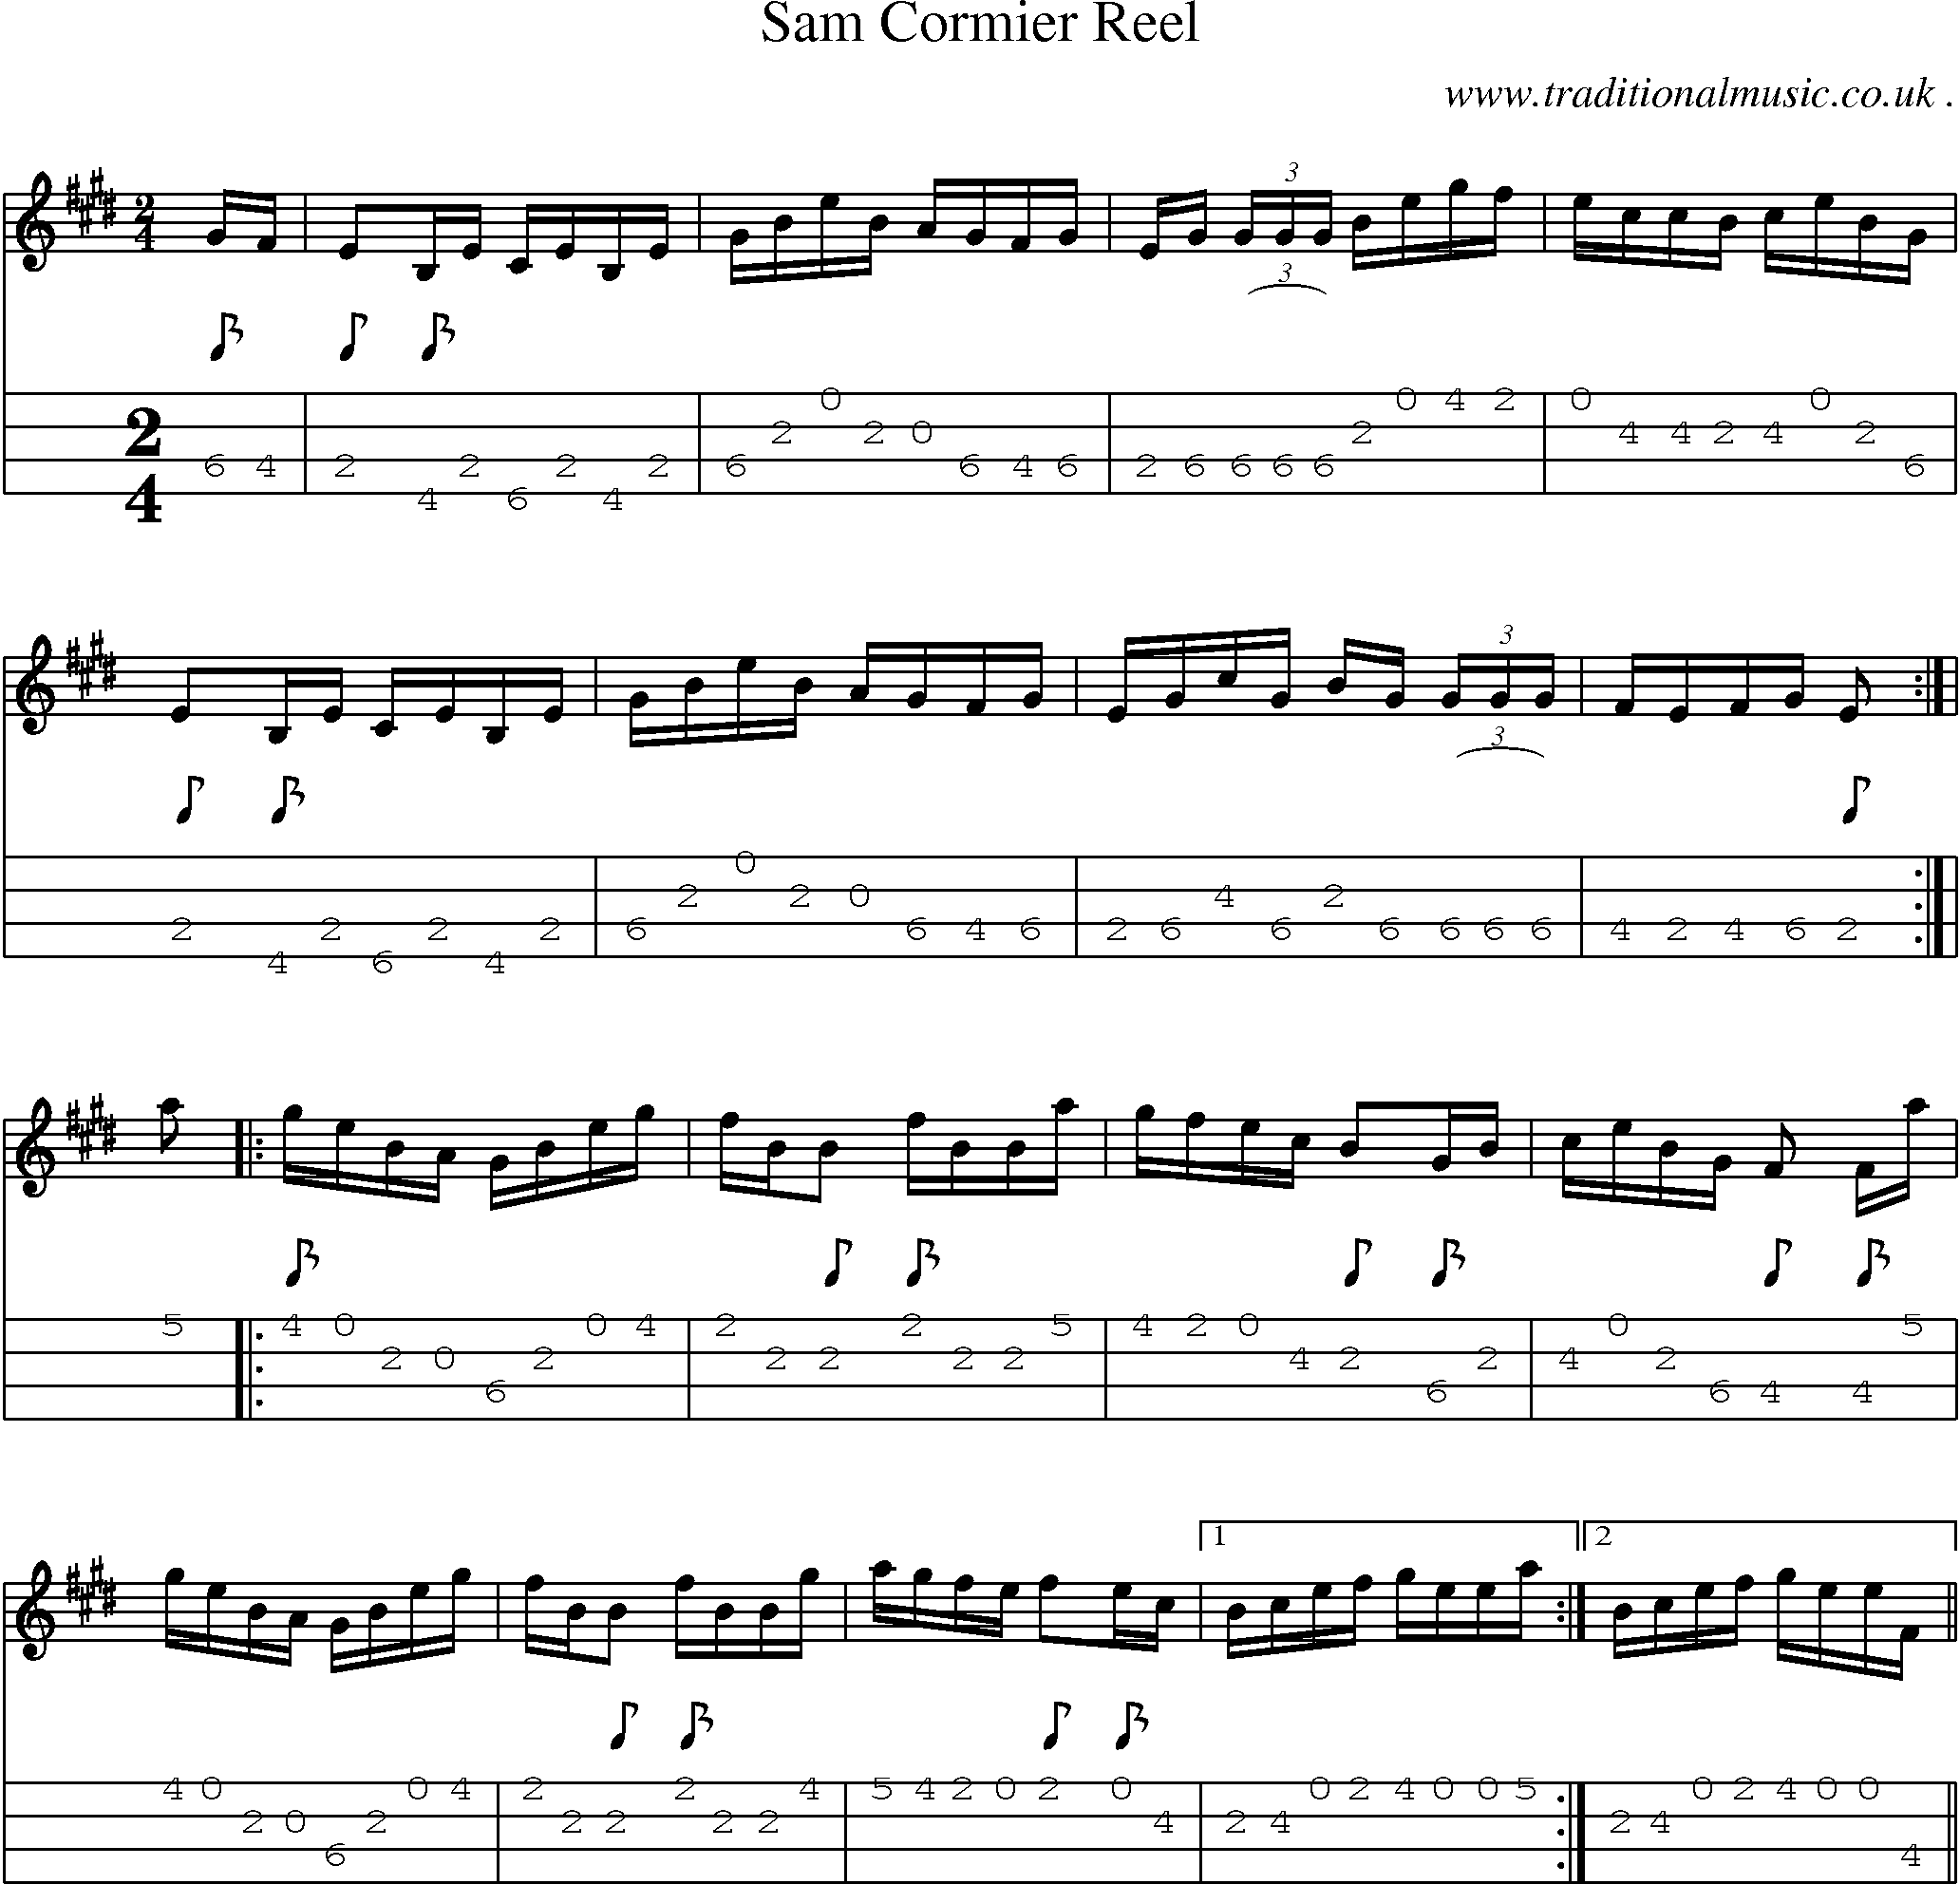 Sheet-Music and Mandolin Tabs for Sam Cormier Reel